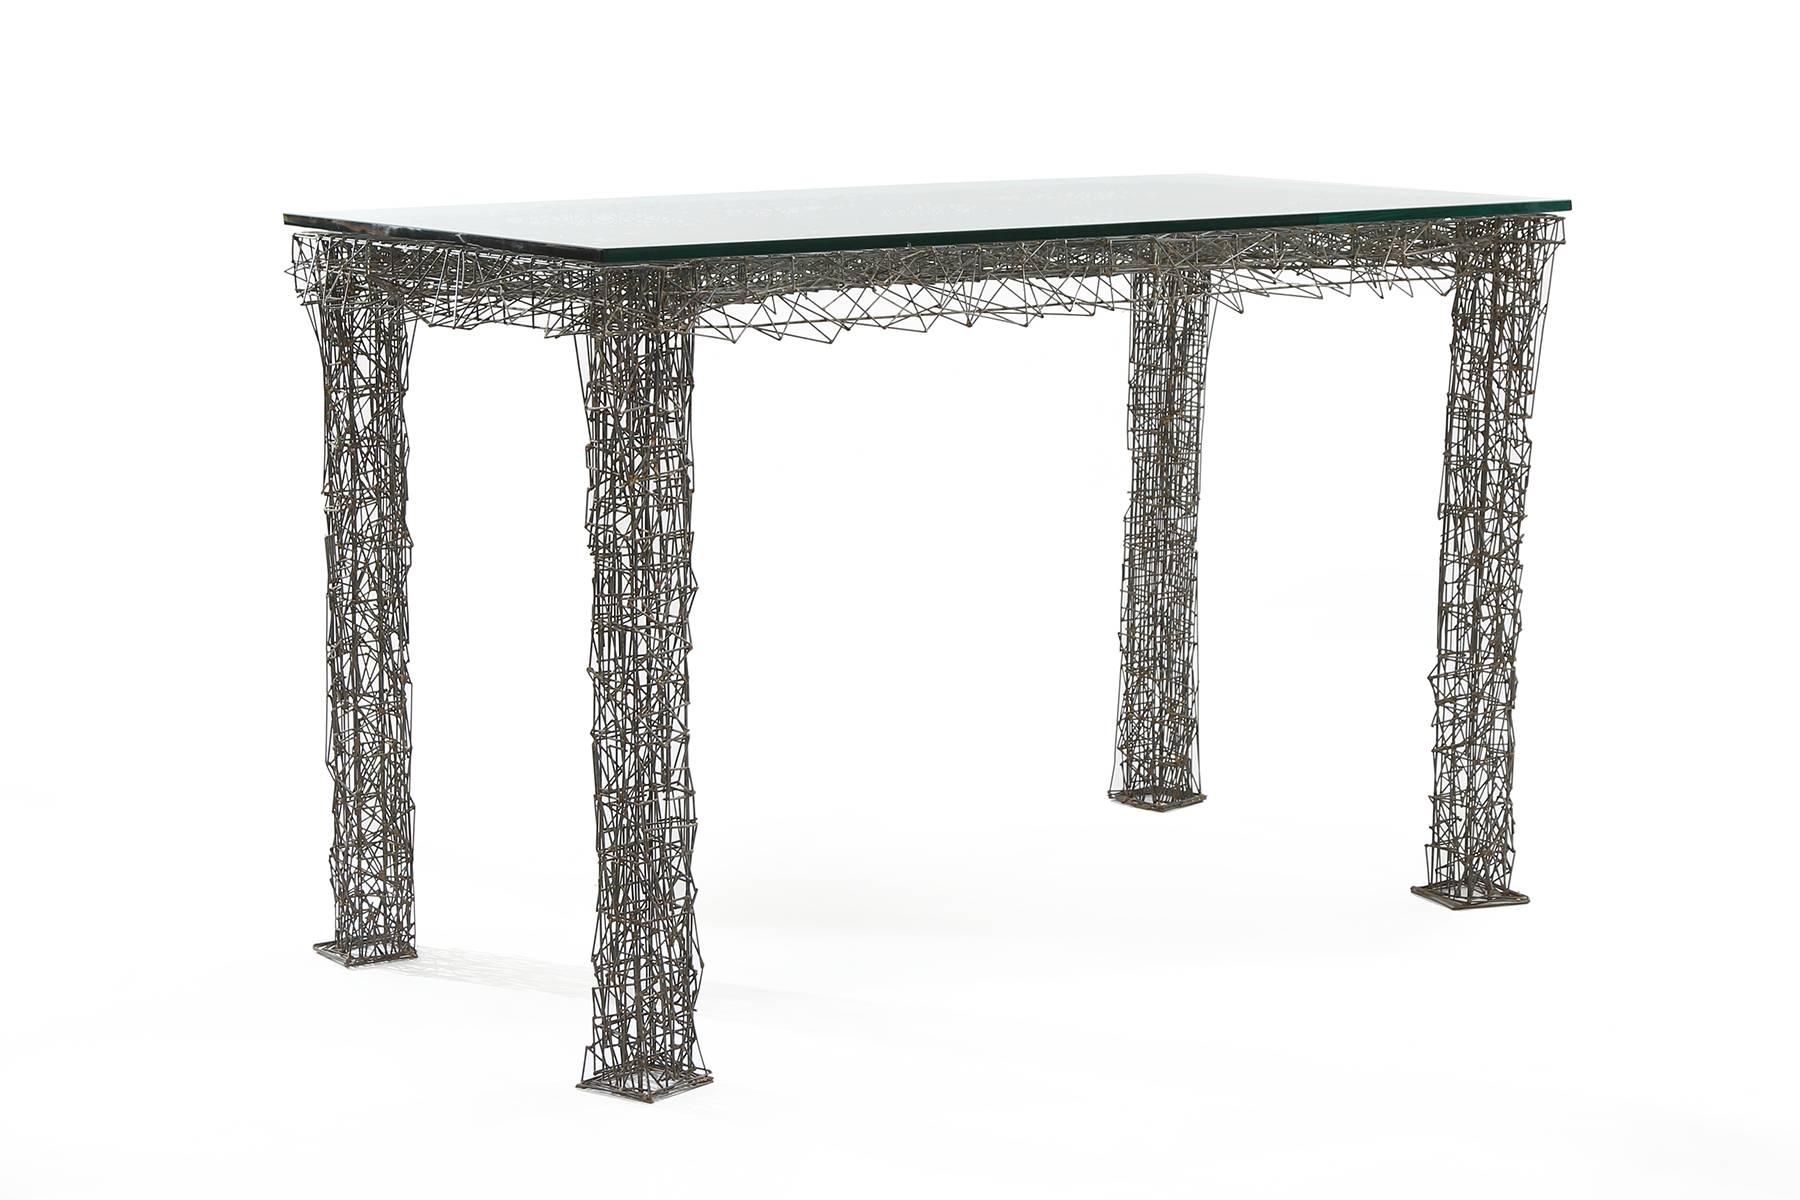 Important William de Lillo wire rod console or dining table, circa late 1970s. William de Lillo worked with Tiffany, Harry Winston and Miriam Haskell and exhibited his jewelry and furniture internationally. This signed one-off example is masterfully